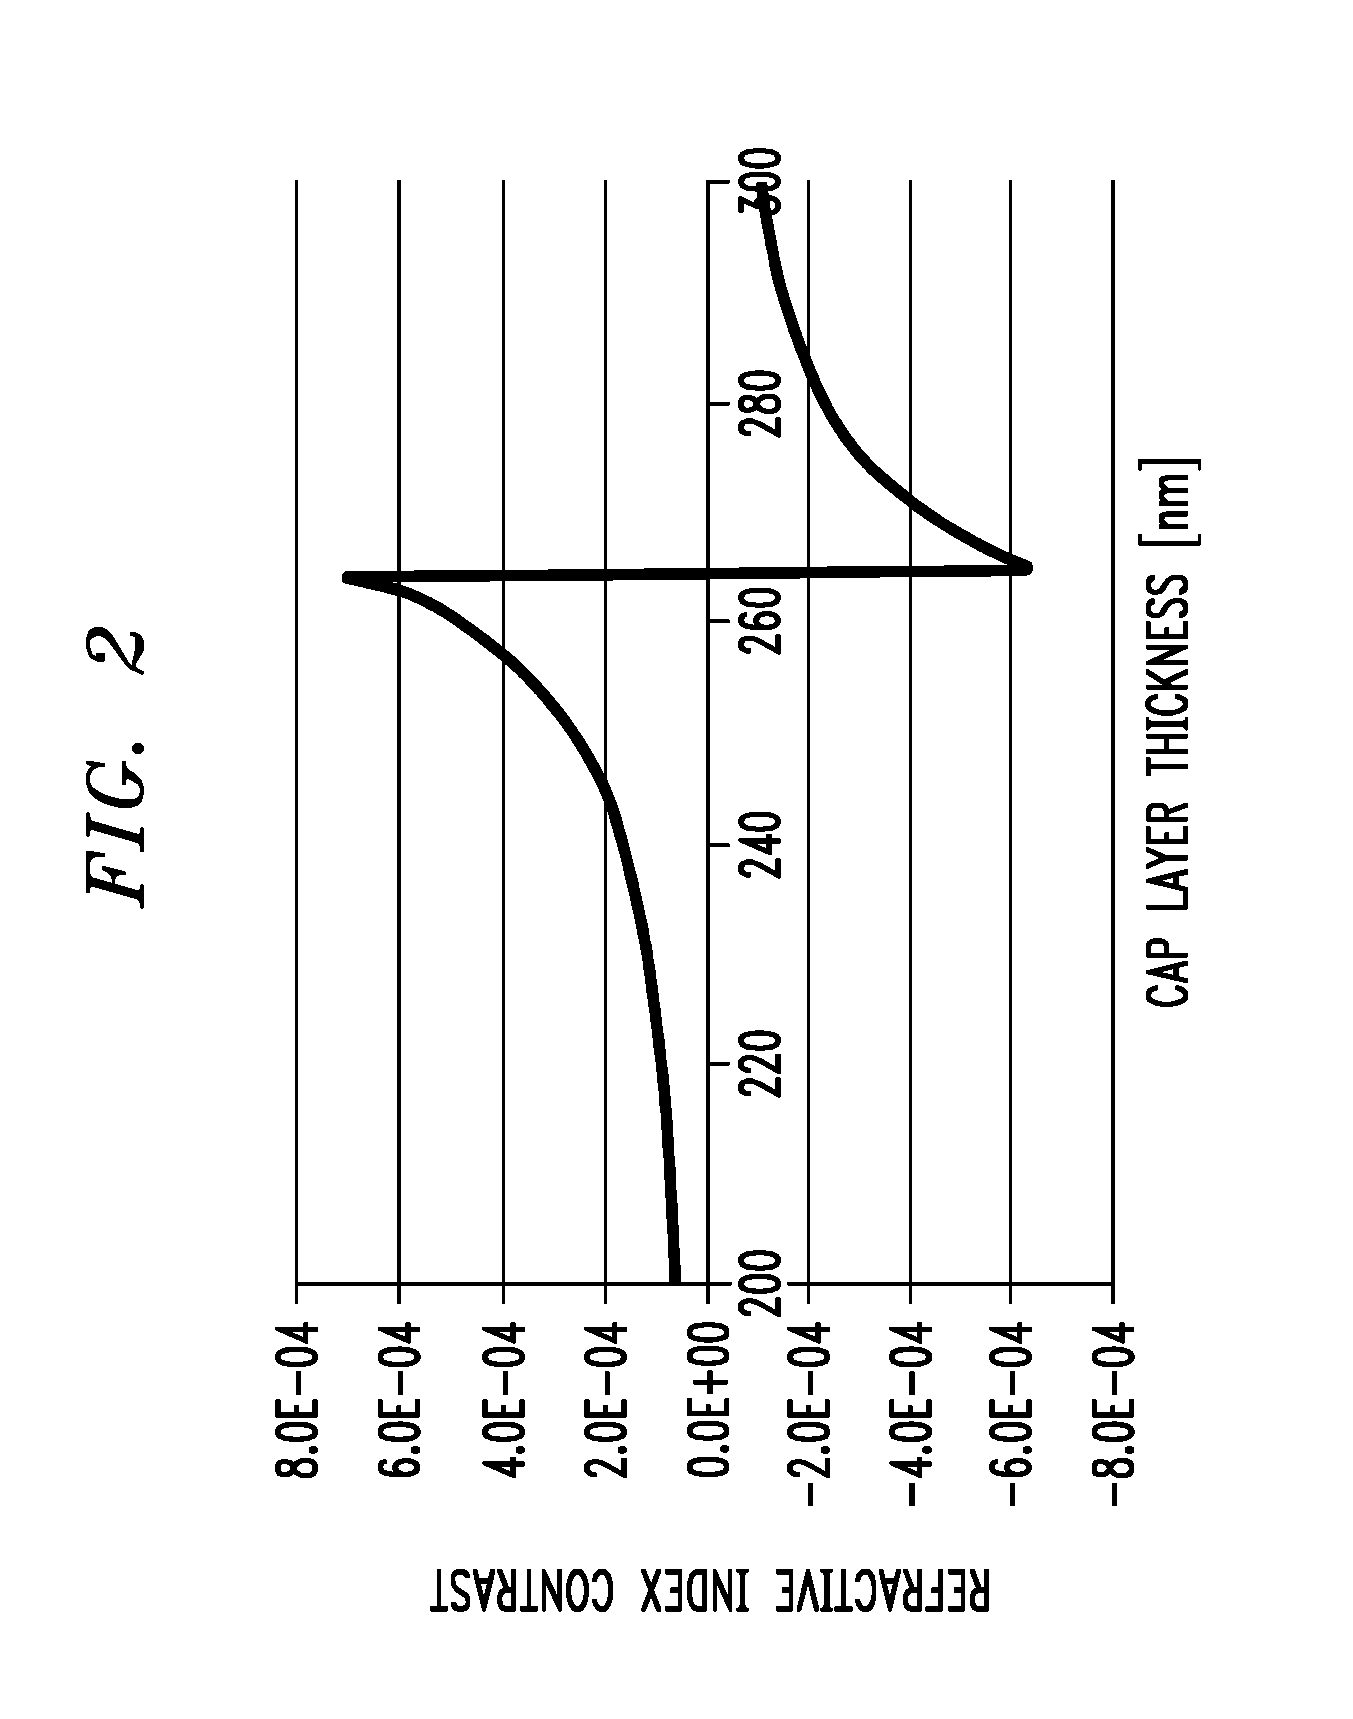 Broad Area Laser Including Anti-Guiding Regions For Higher-Order Lateral Mode Suppression